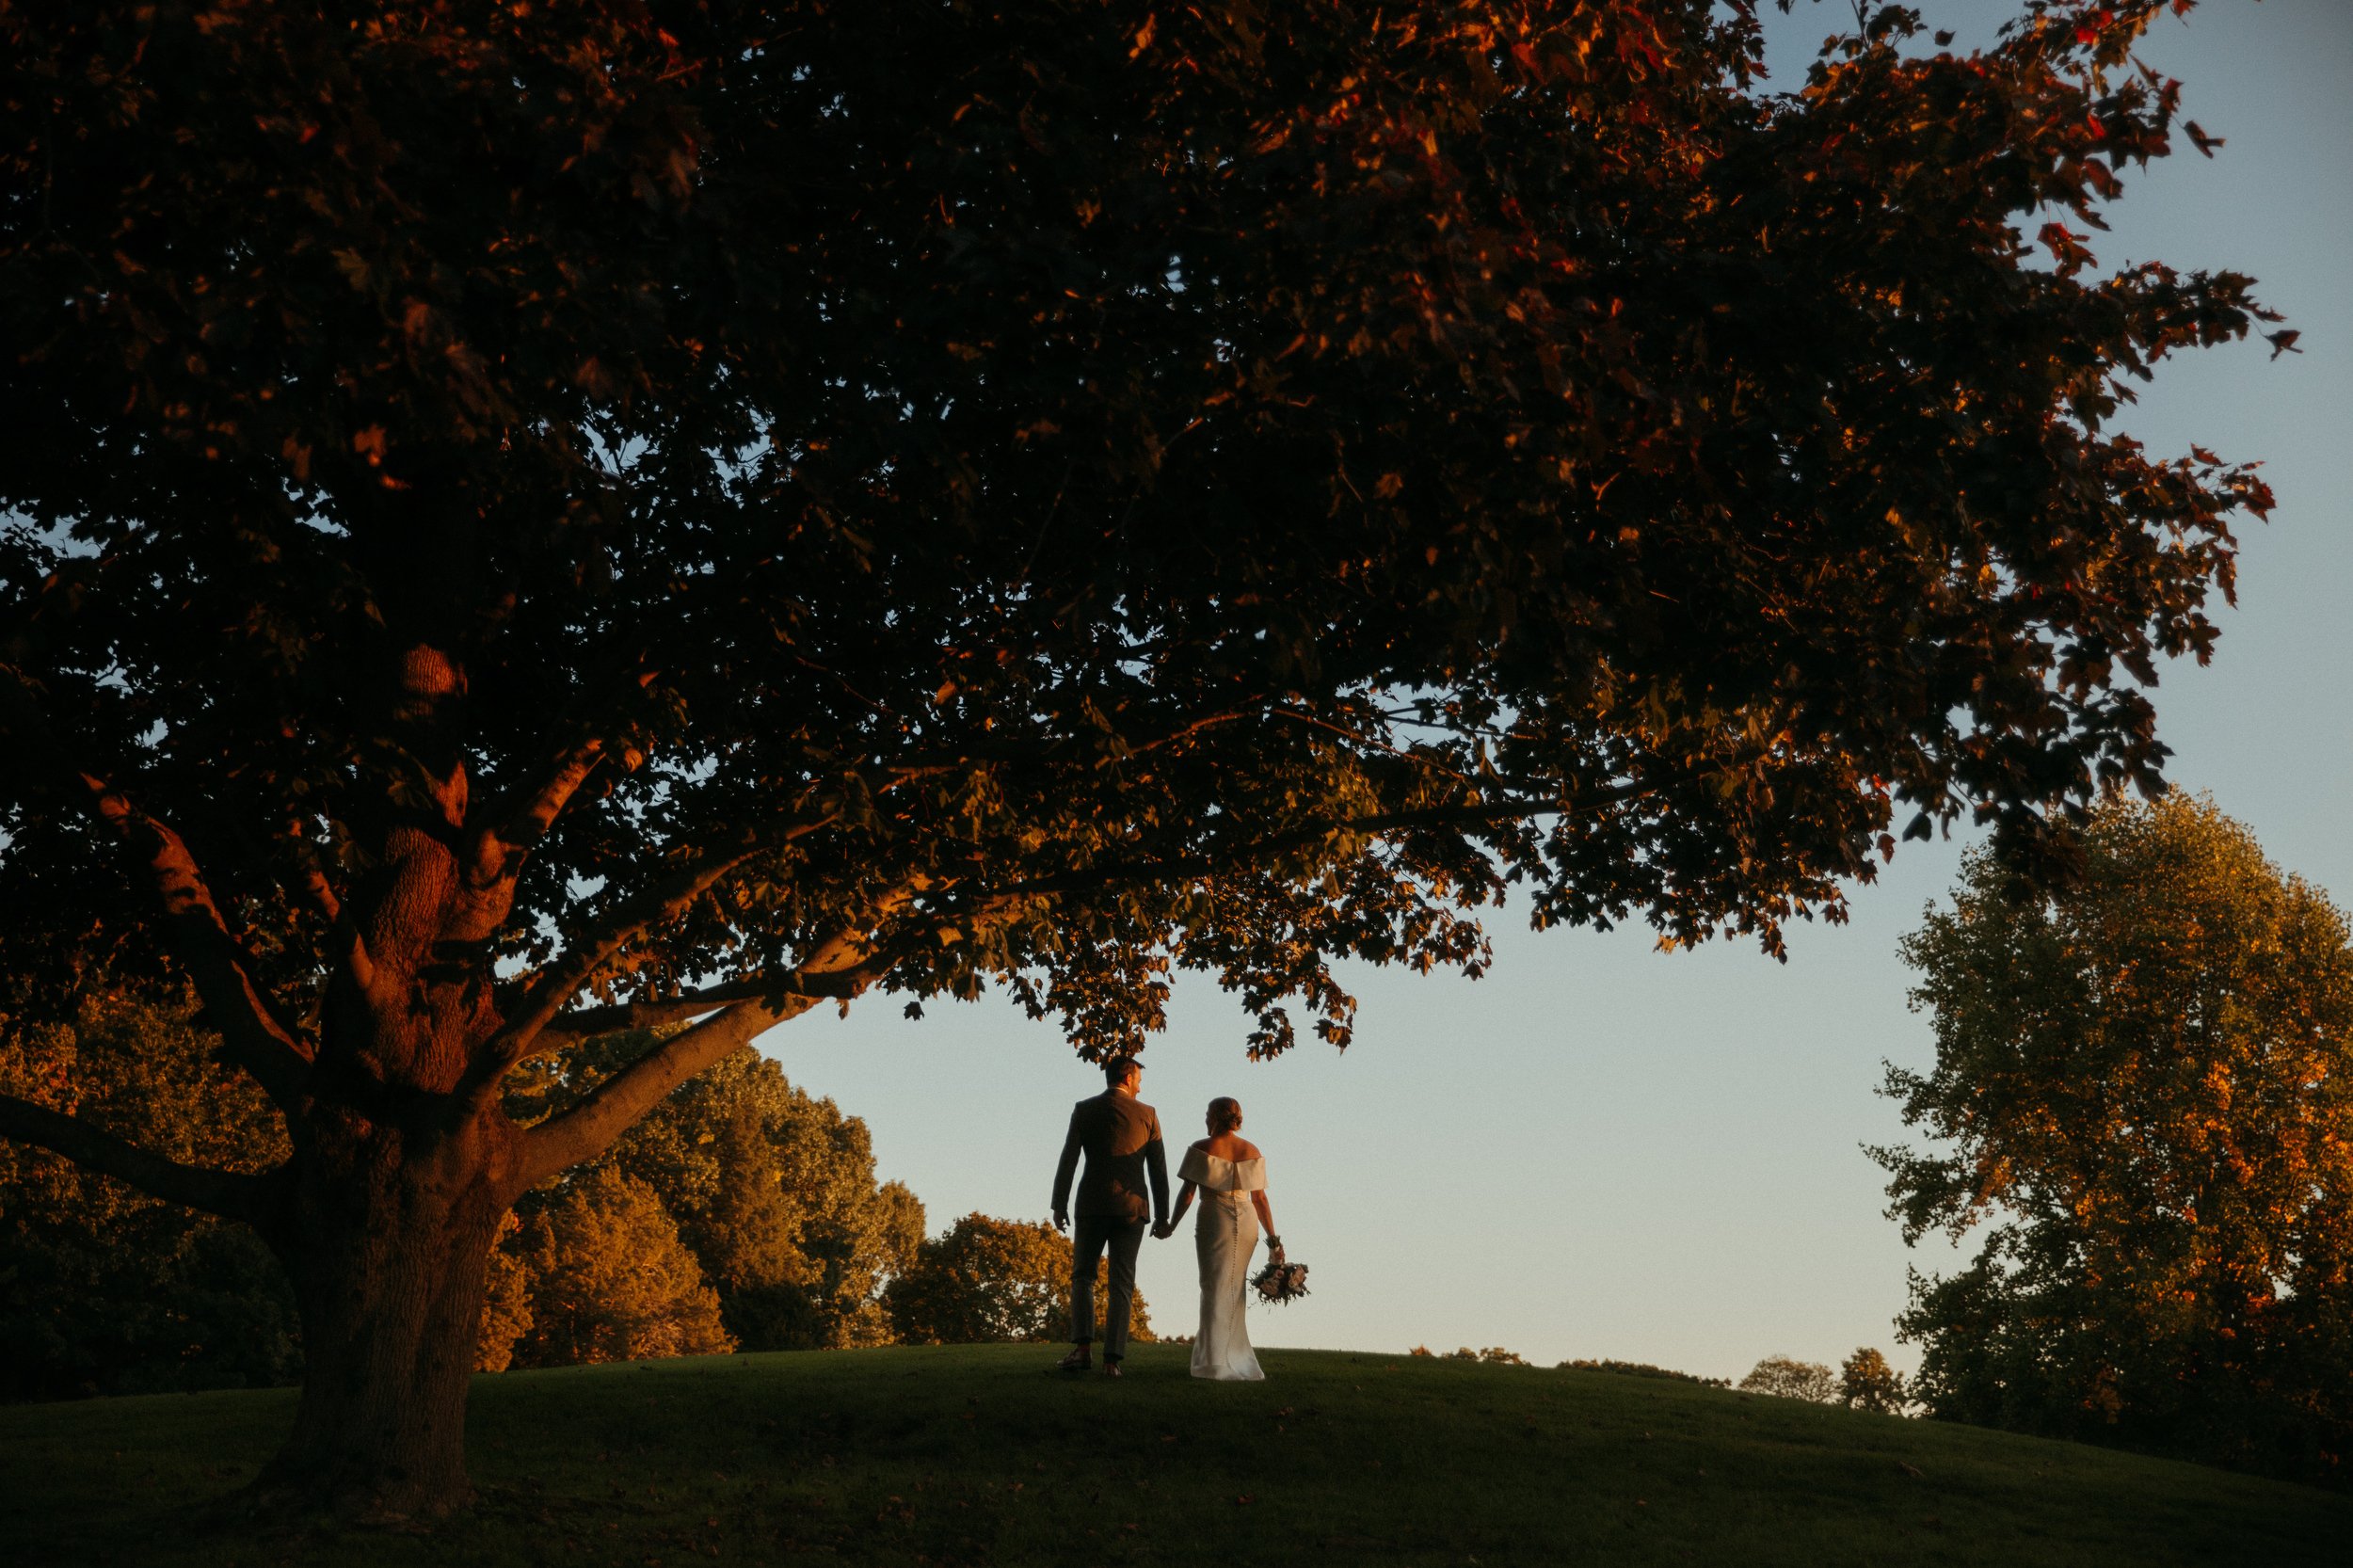 Glastonbury Abbey and Cohasett Golf Club Luxury tent wedding in early fall stylish bride and groom with oysters for placement cards and golden sunset vibes in an editorial documentary style